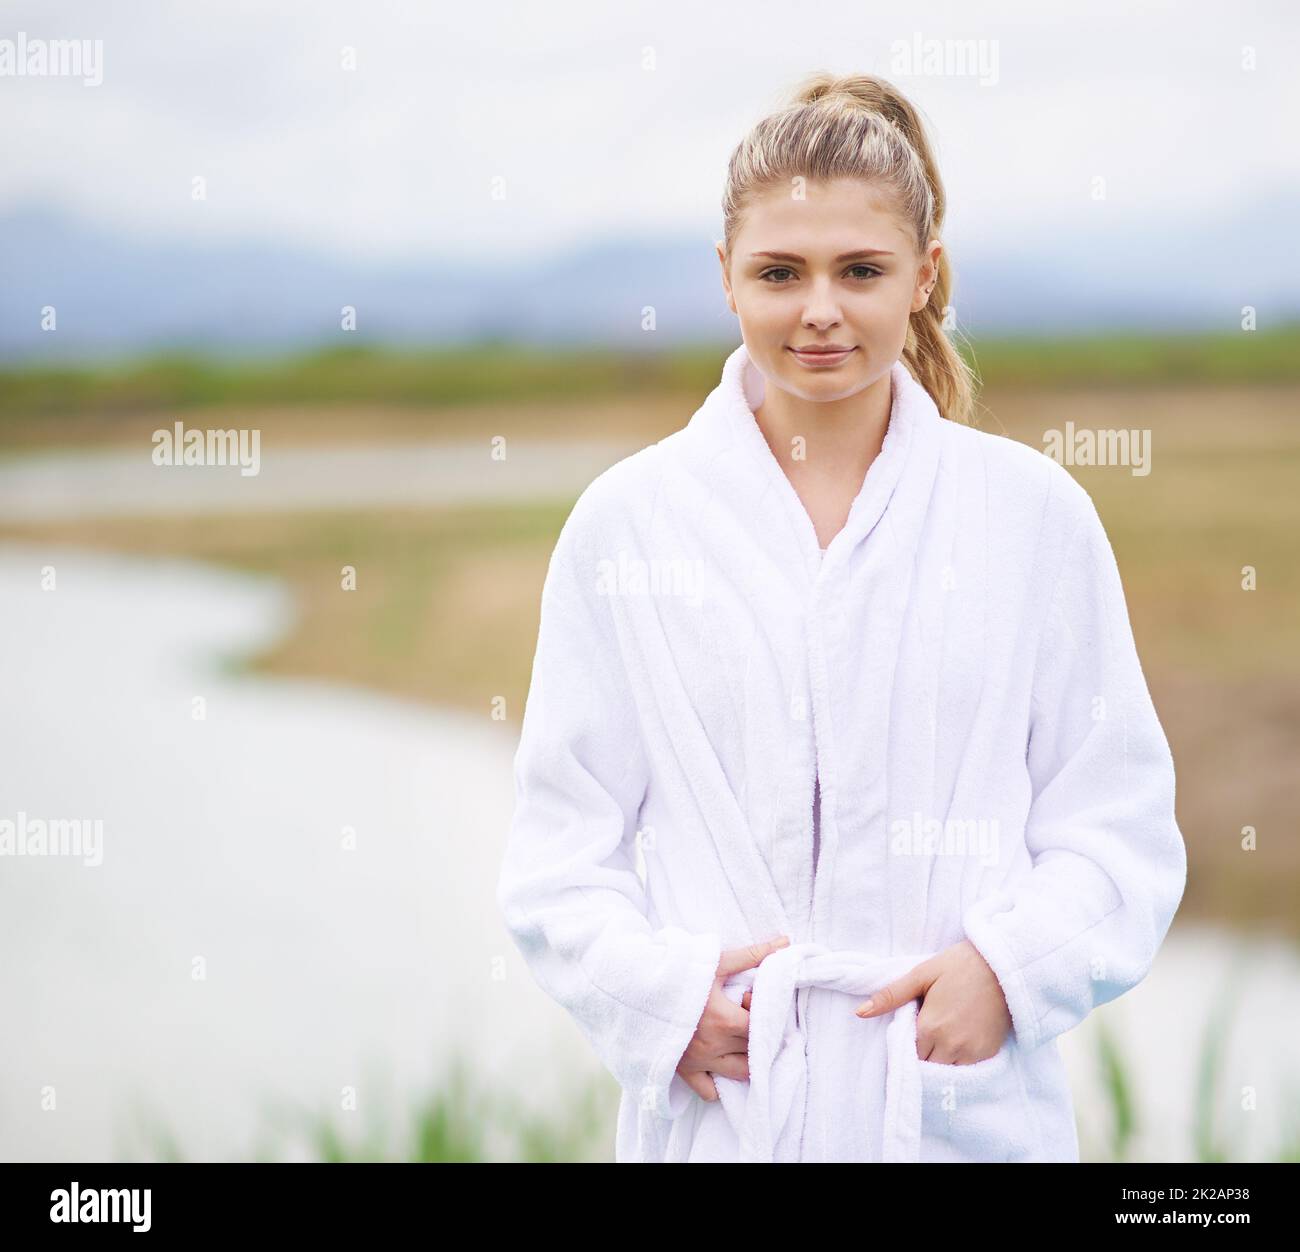 Enjoying a luxurious getaway. Shot of a young woman wearing a robe standing in the outdoors. Stock Photo